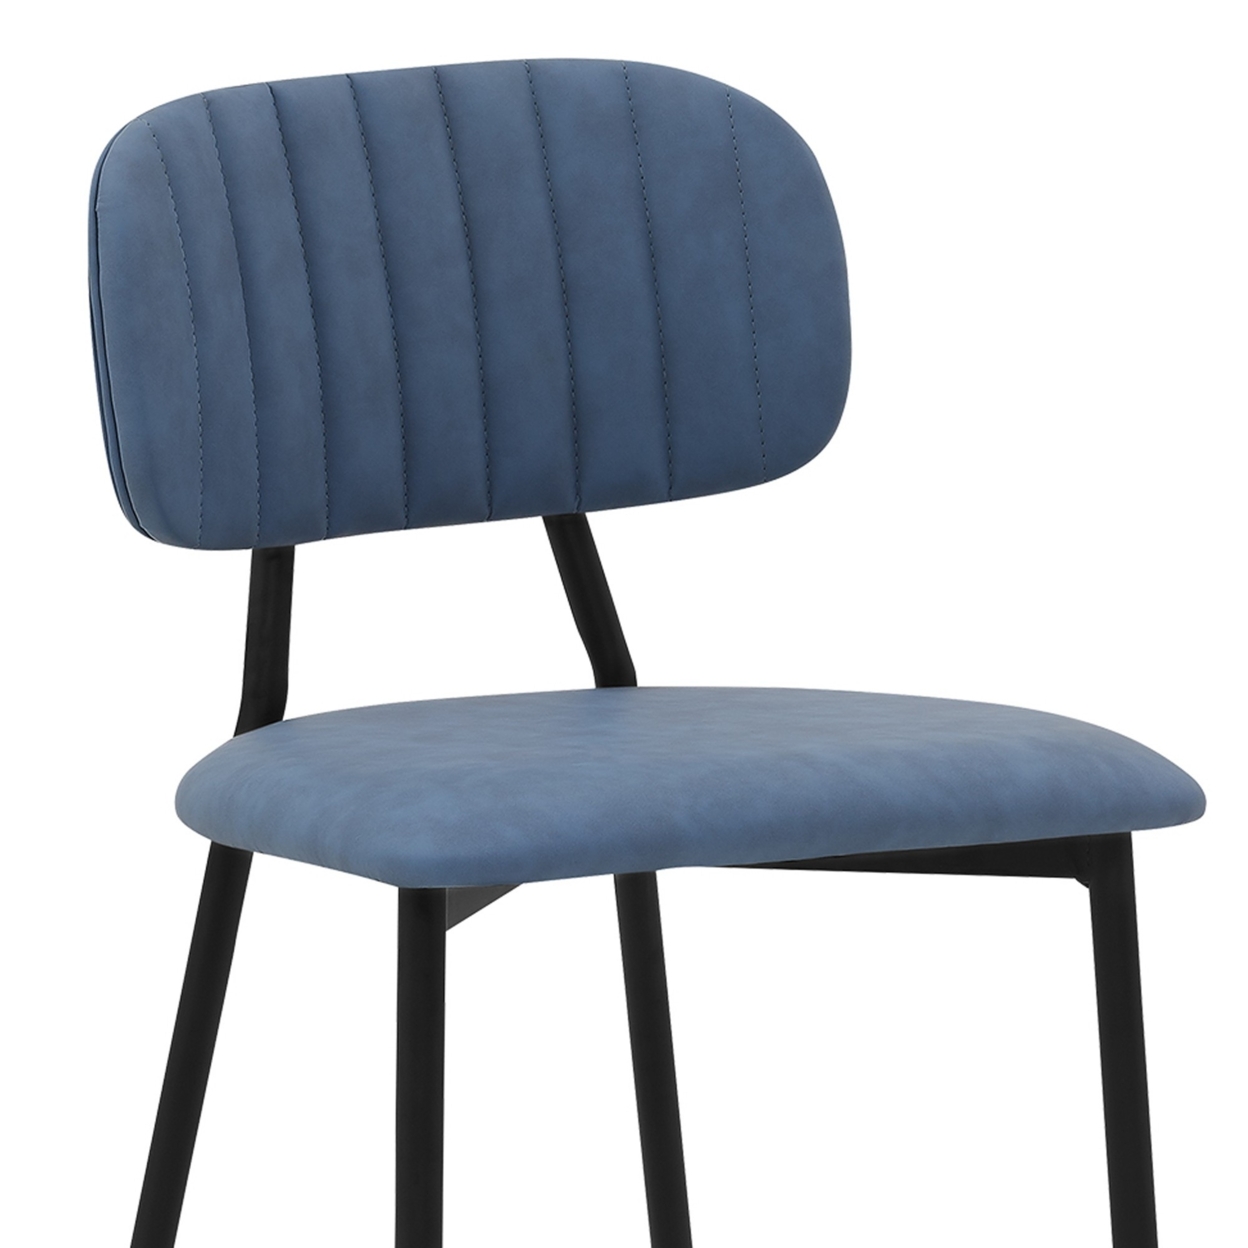 26 Inch Leatherette And Metal Barstool, Blue And Black- Saltoro Sherpi